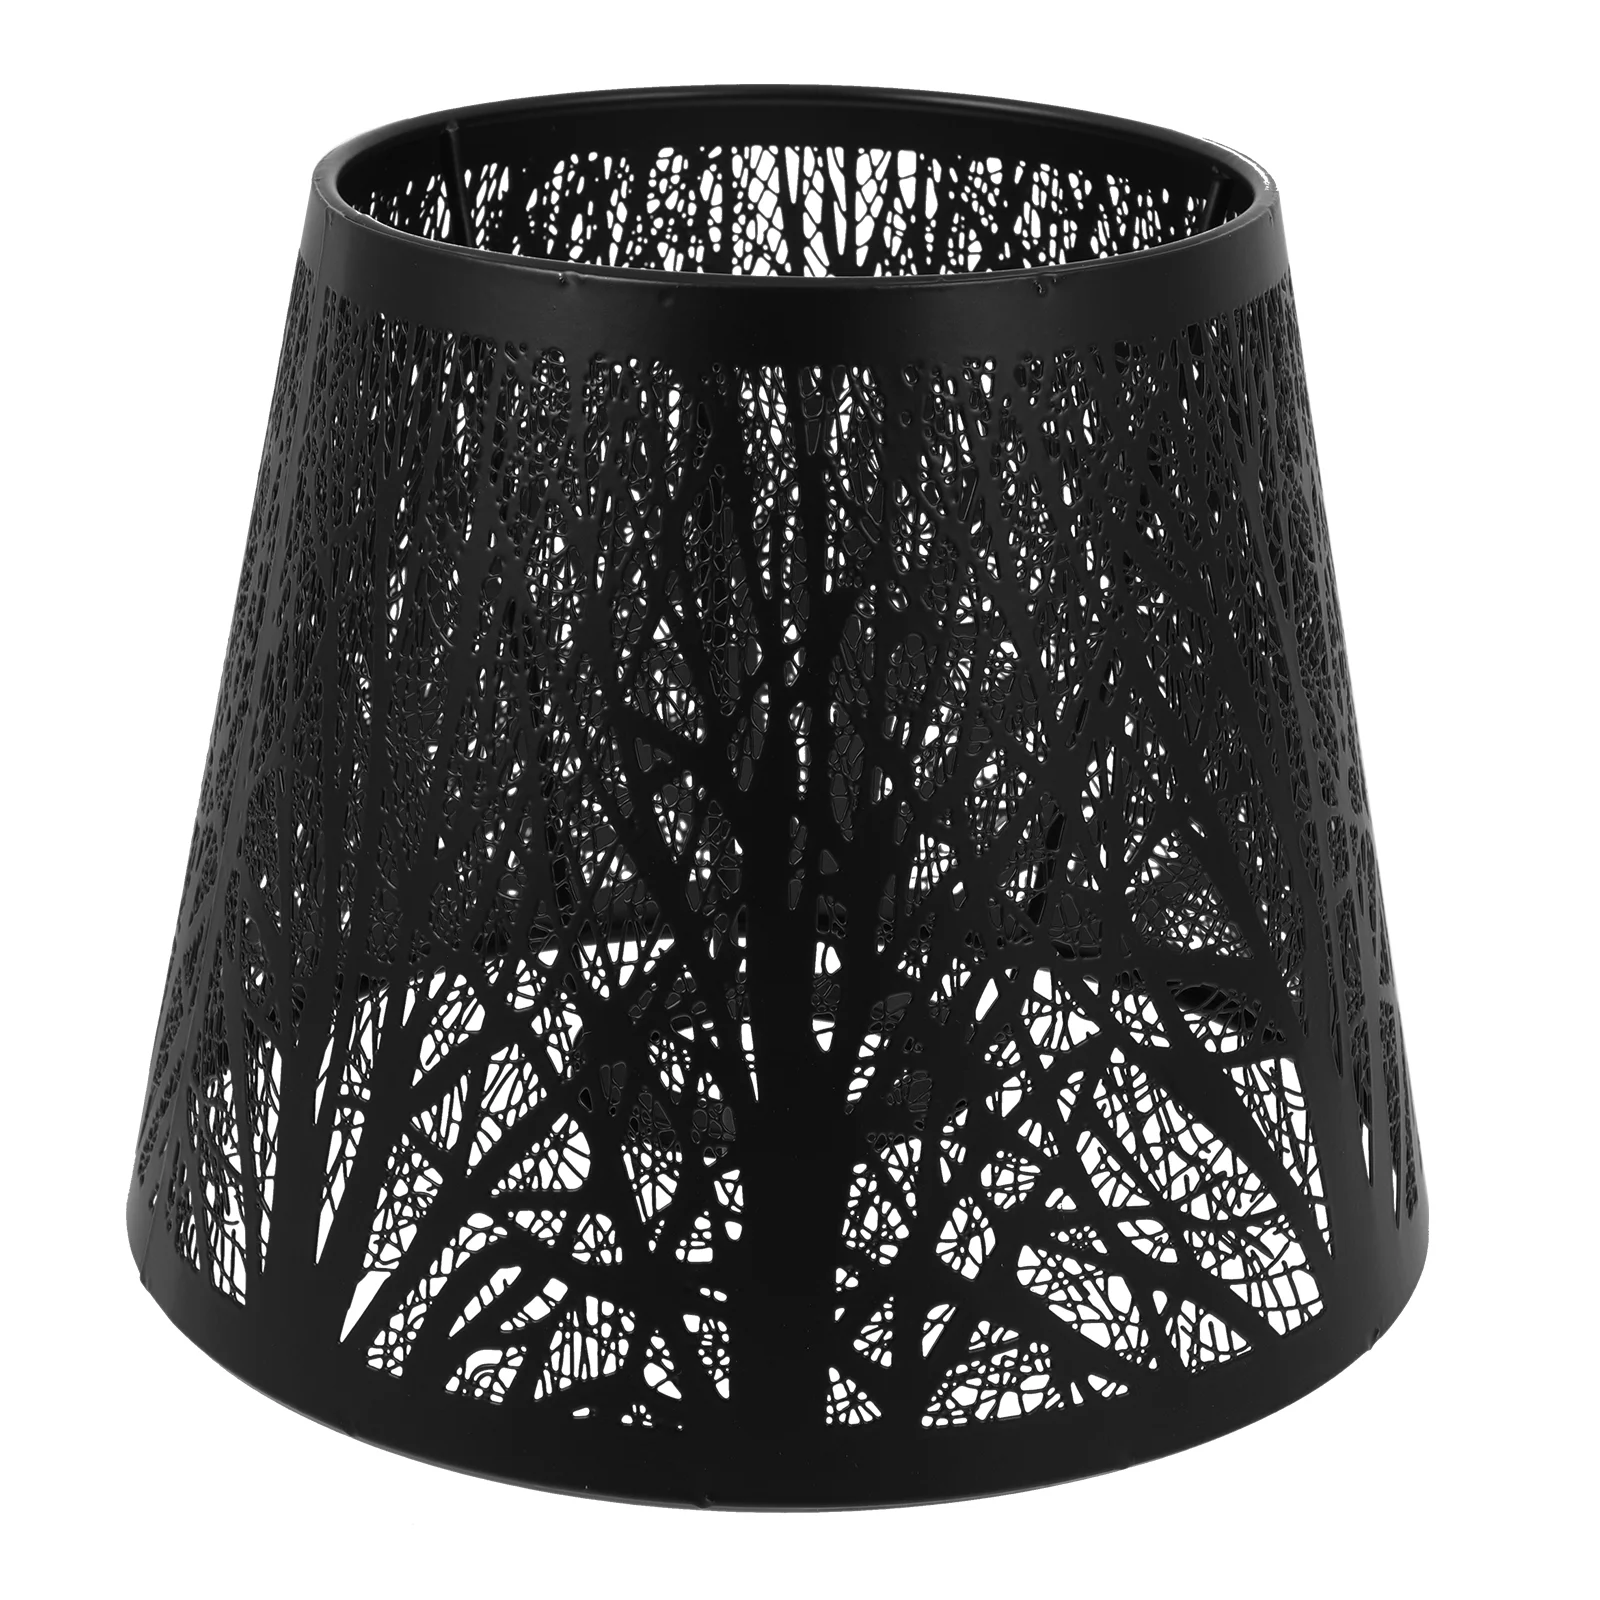 

Wrought Iron Lampshade Dustproof Decorate E27 Light Mouth Bulb Accessory Simple Style Cover